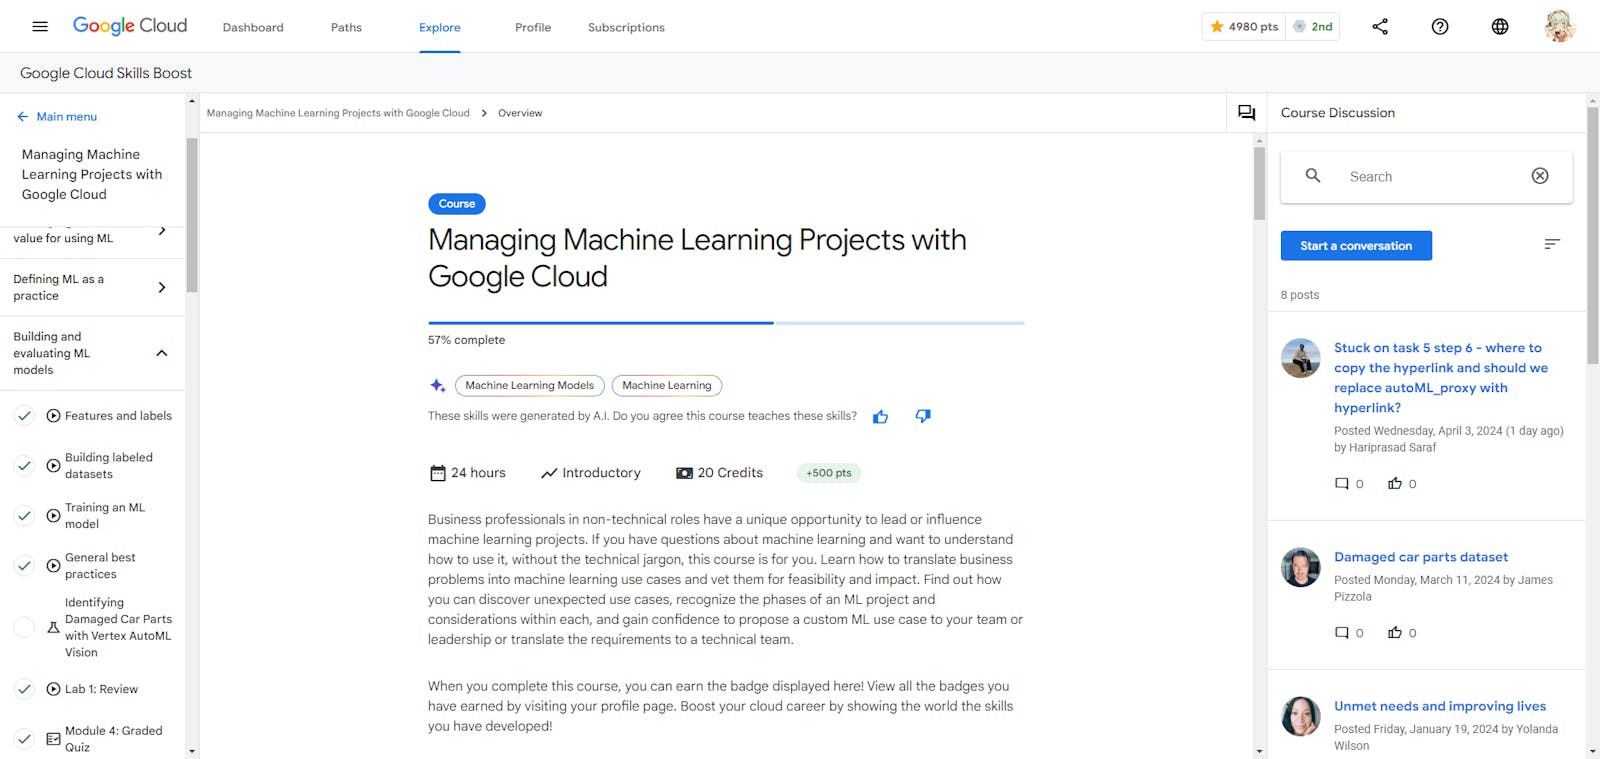 Managing Machine Learning Projects with Google Cloud - Quiz